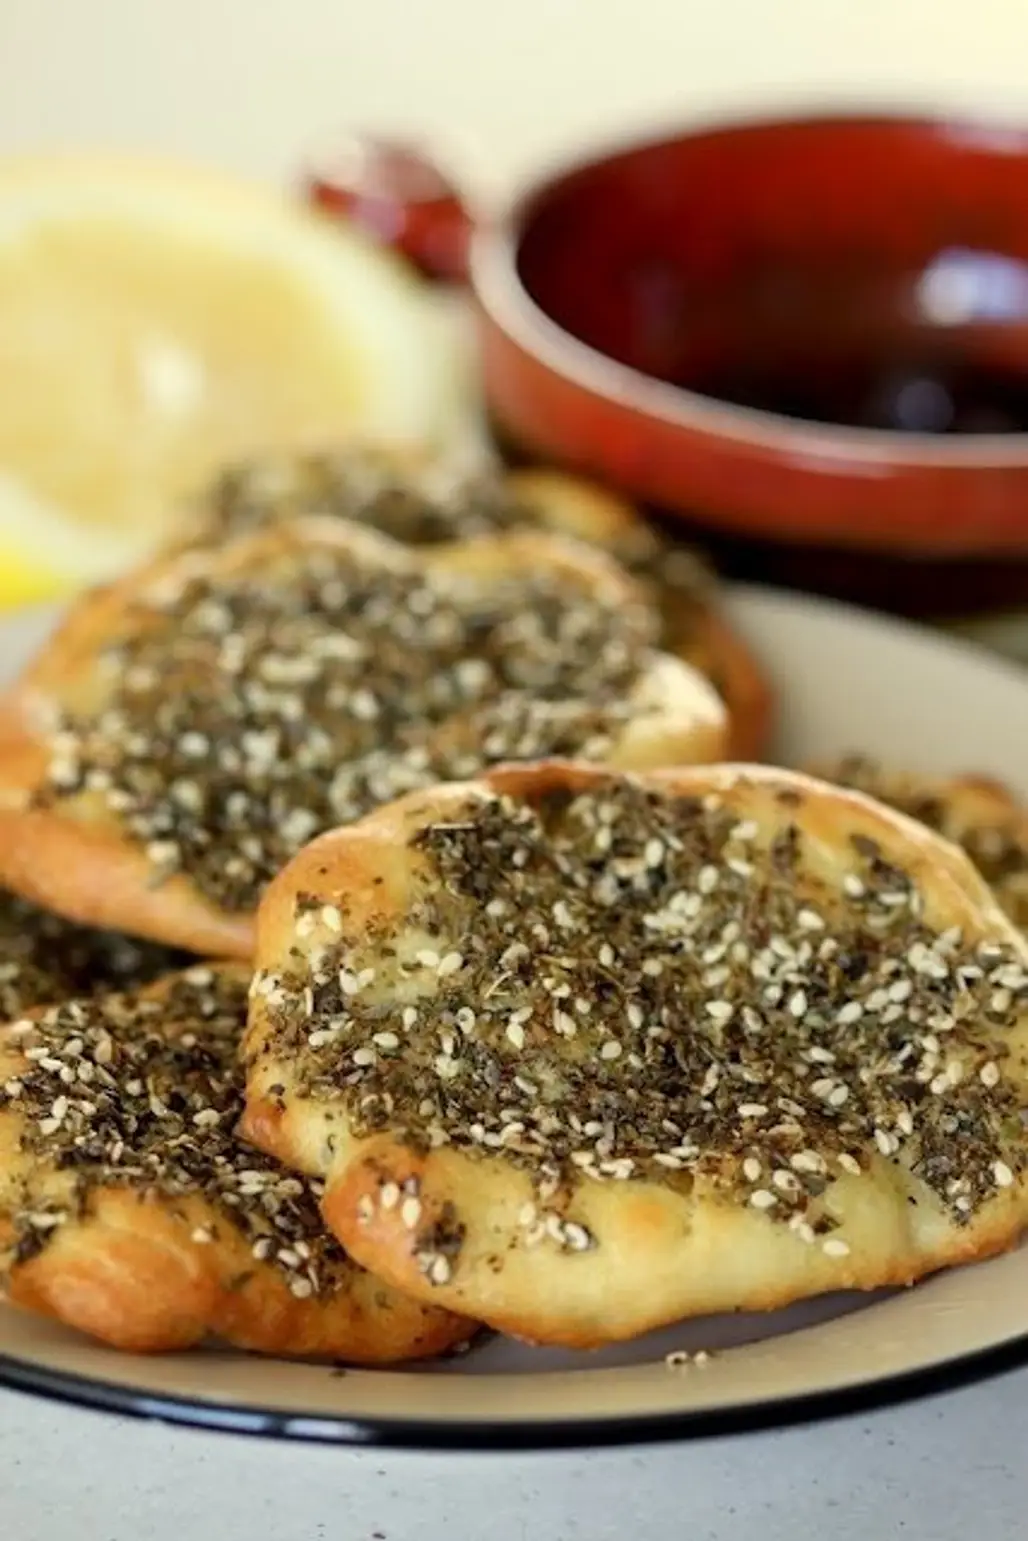 Middle Eastern Bread with Mixed Spice Topping